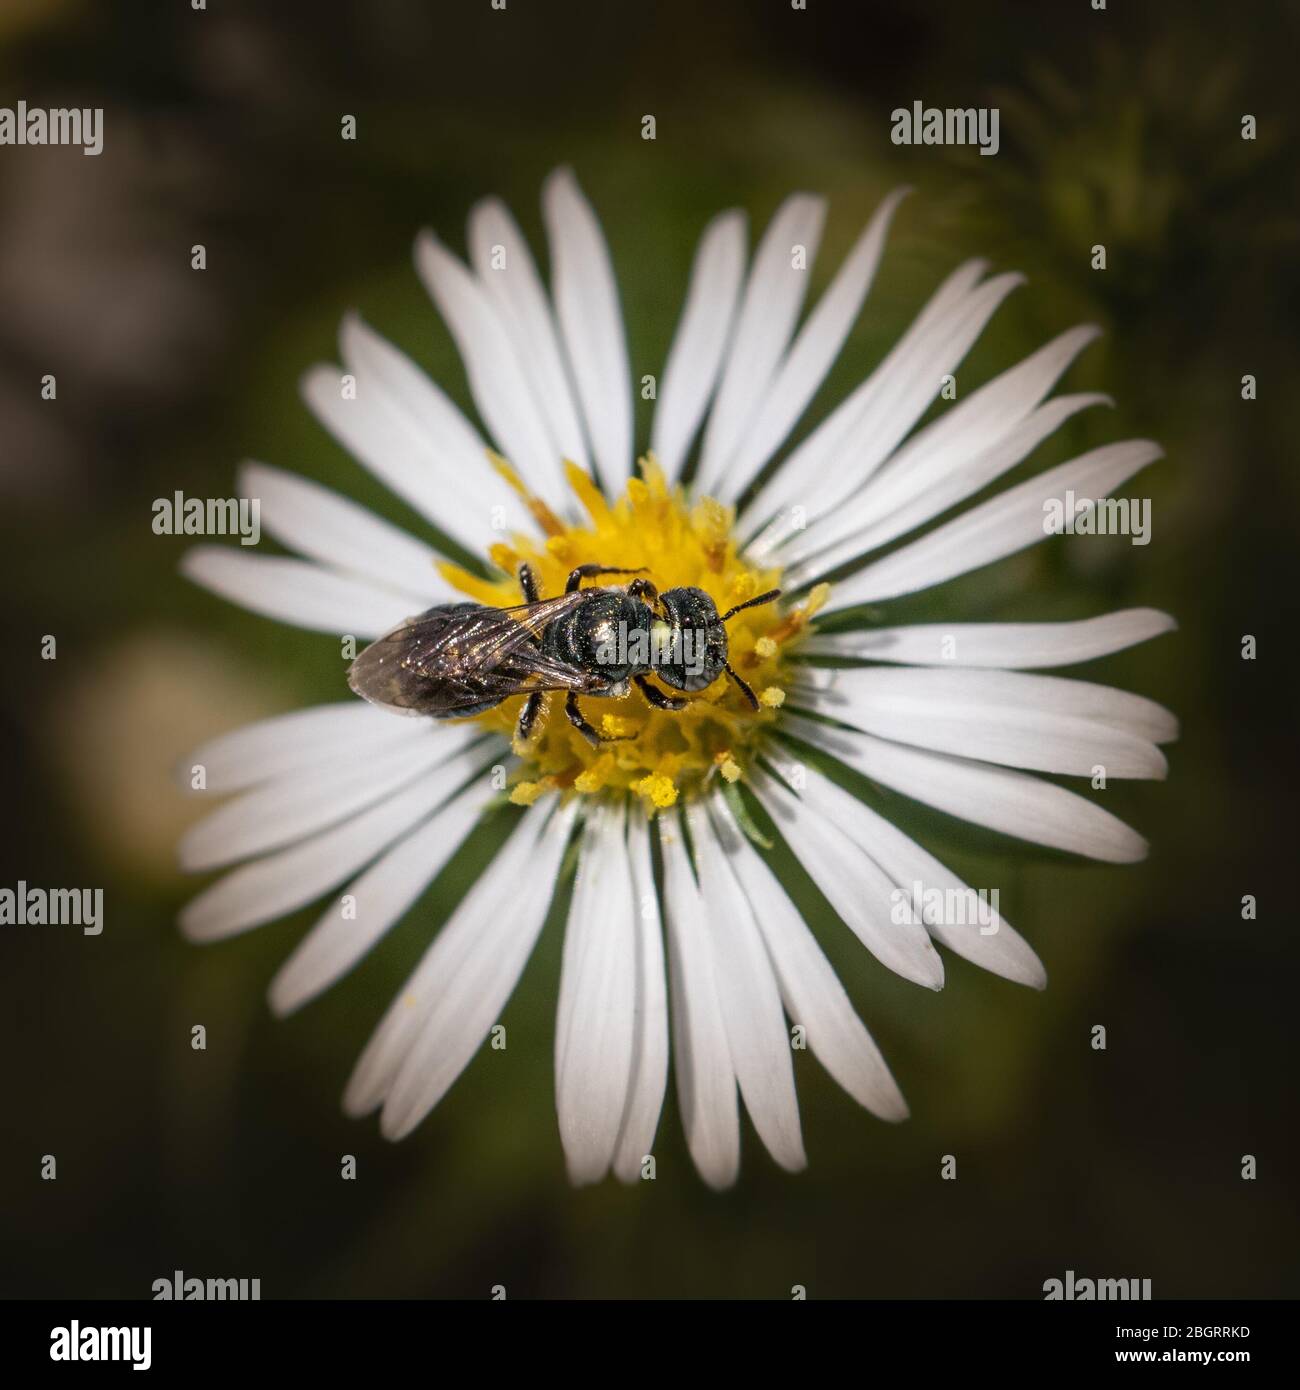 A sweat bee in a summer meadow feeds on a white daisy with a yellow center Stock Photo